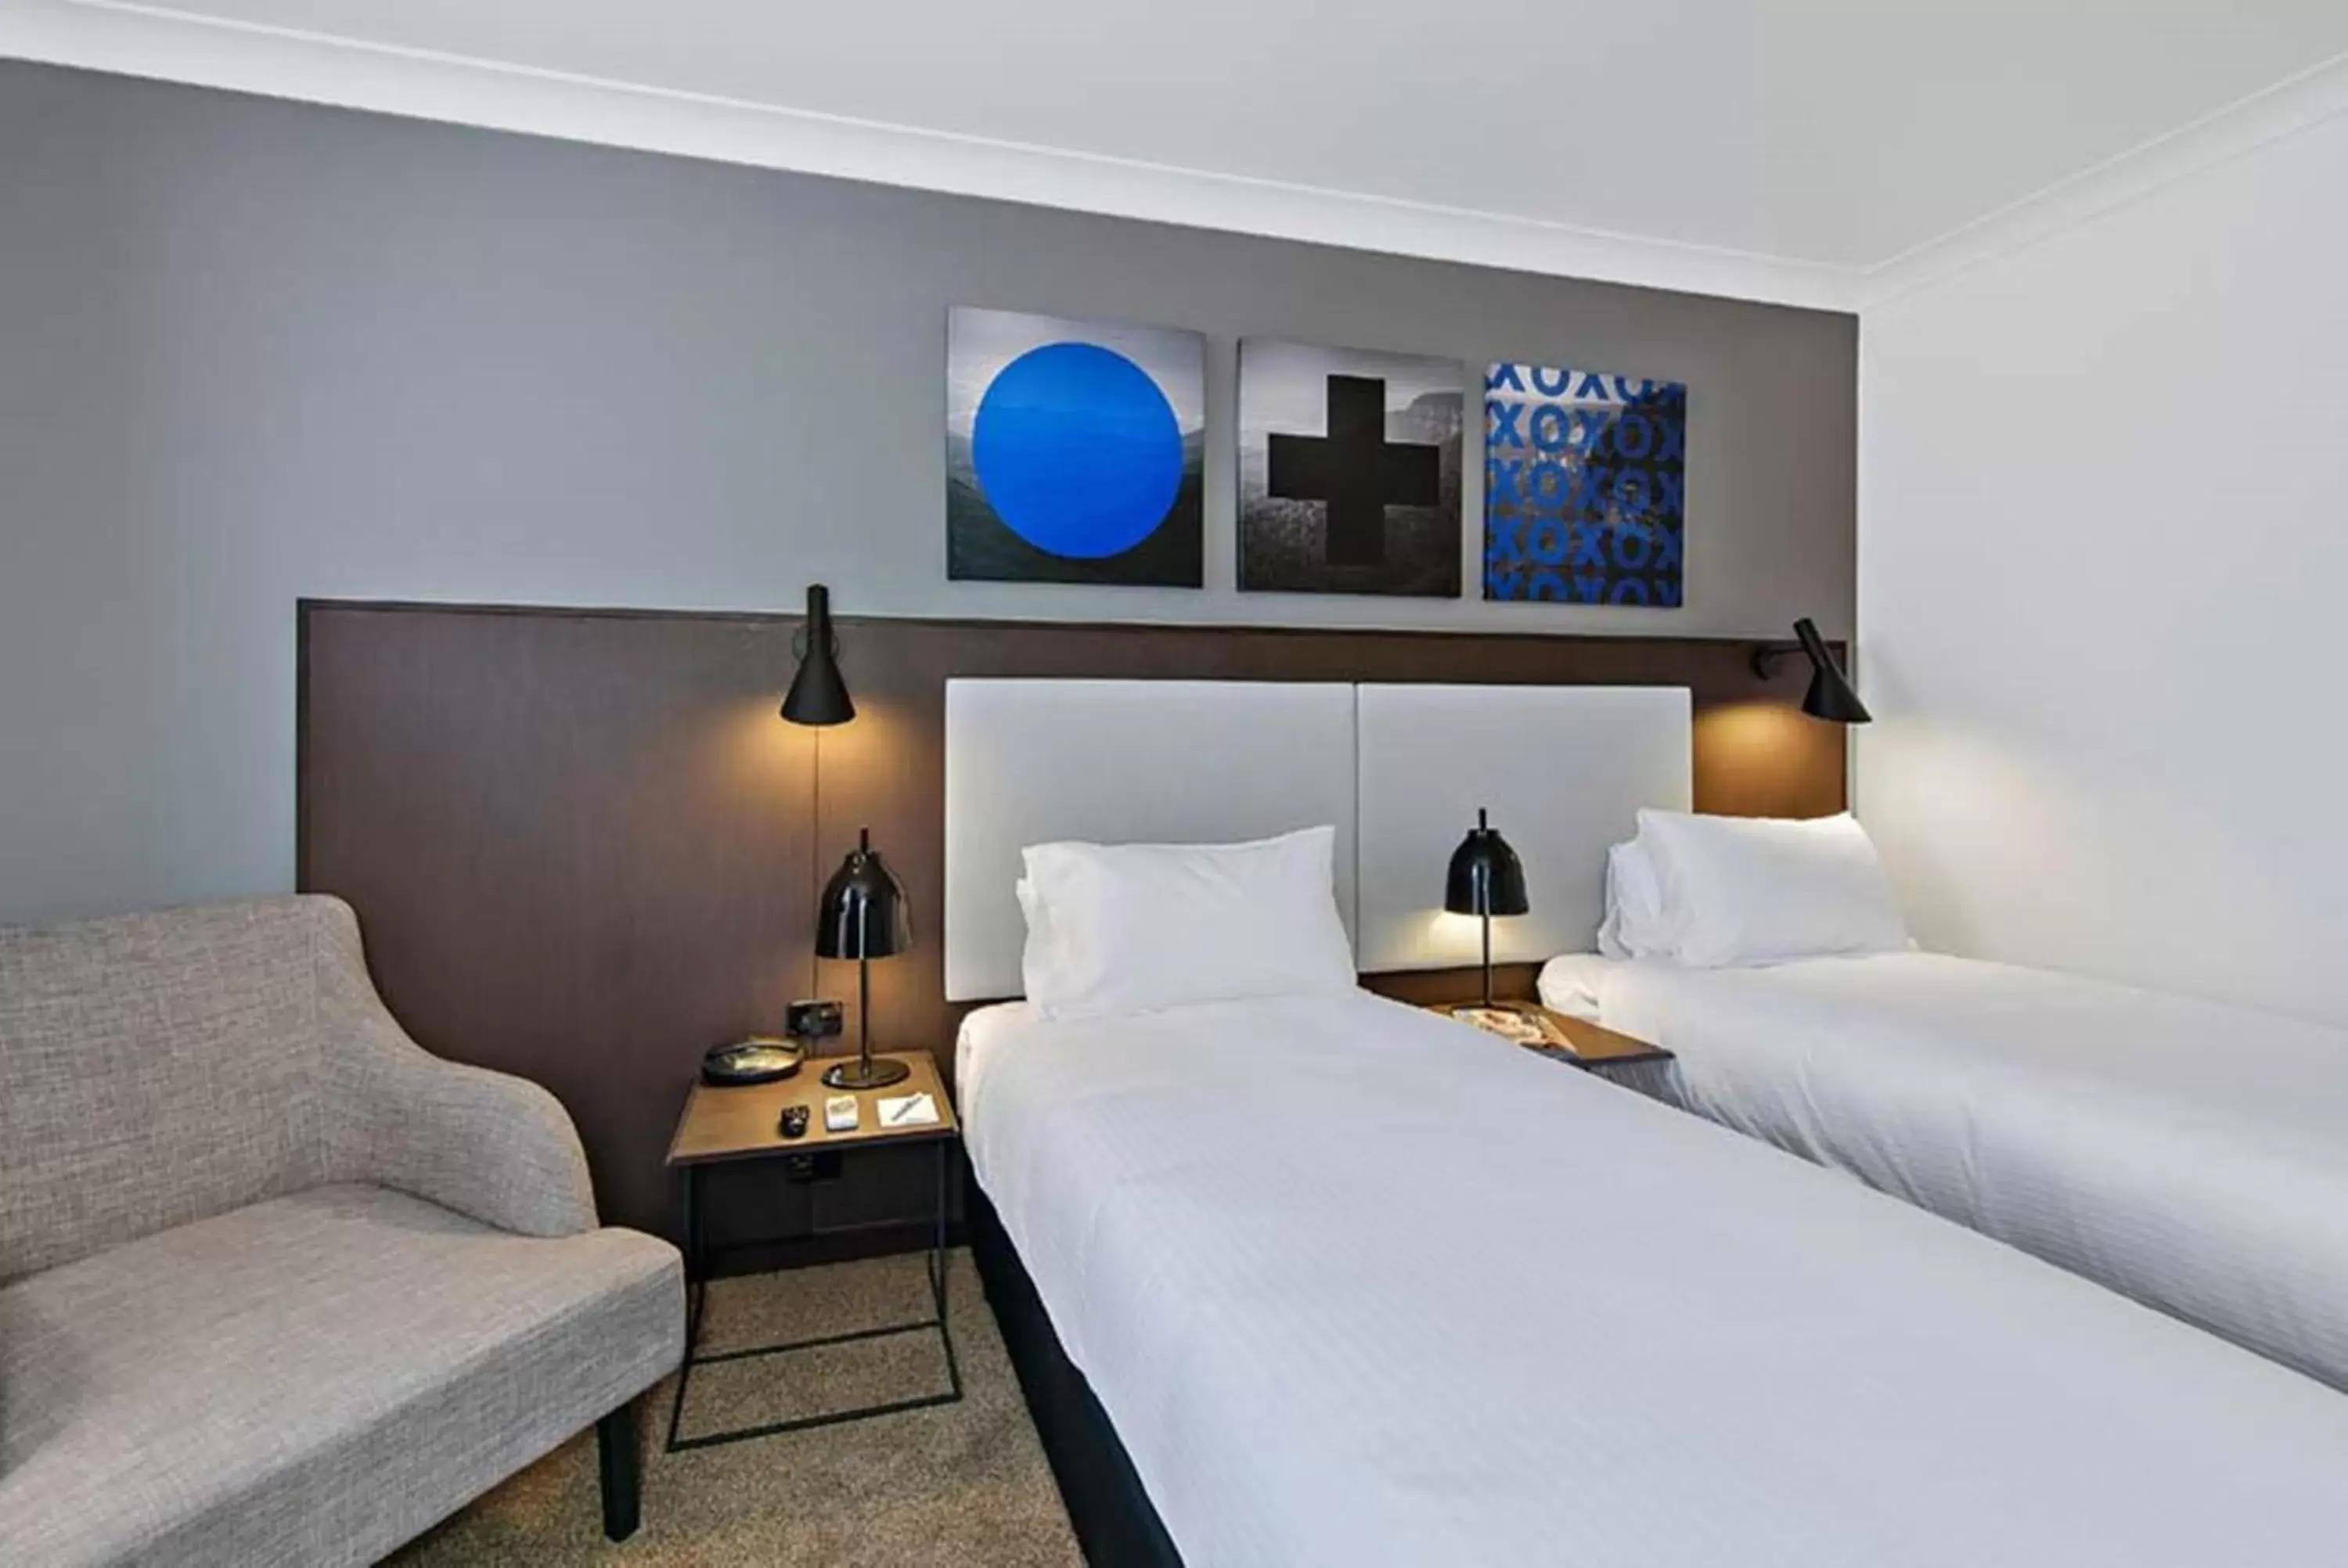 Bed, Room Photo in CKS Sydney Airport Hotel